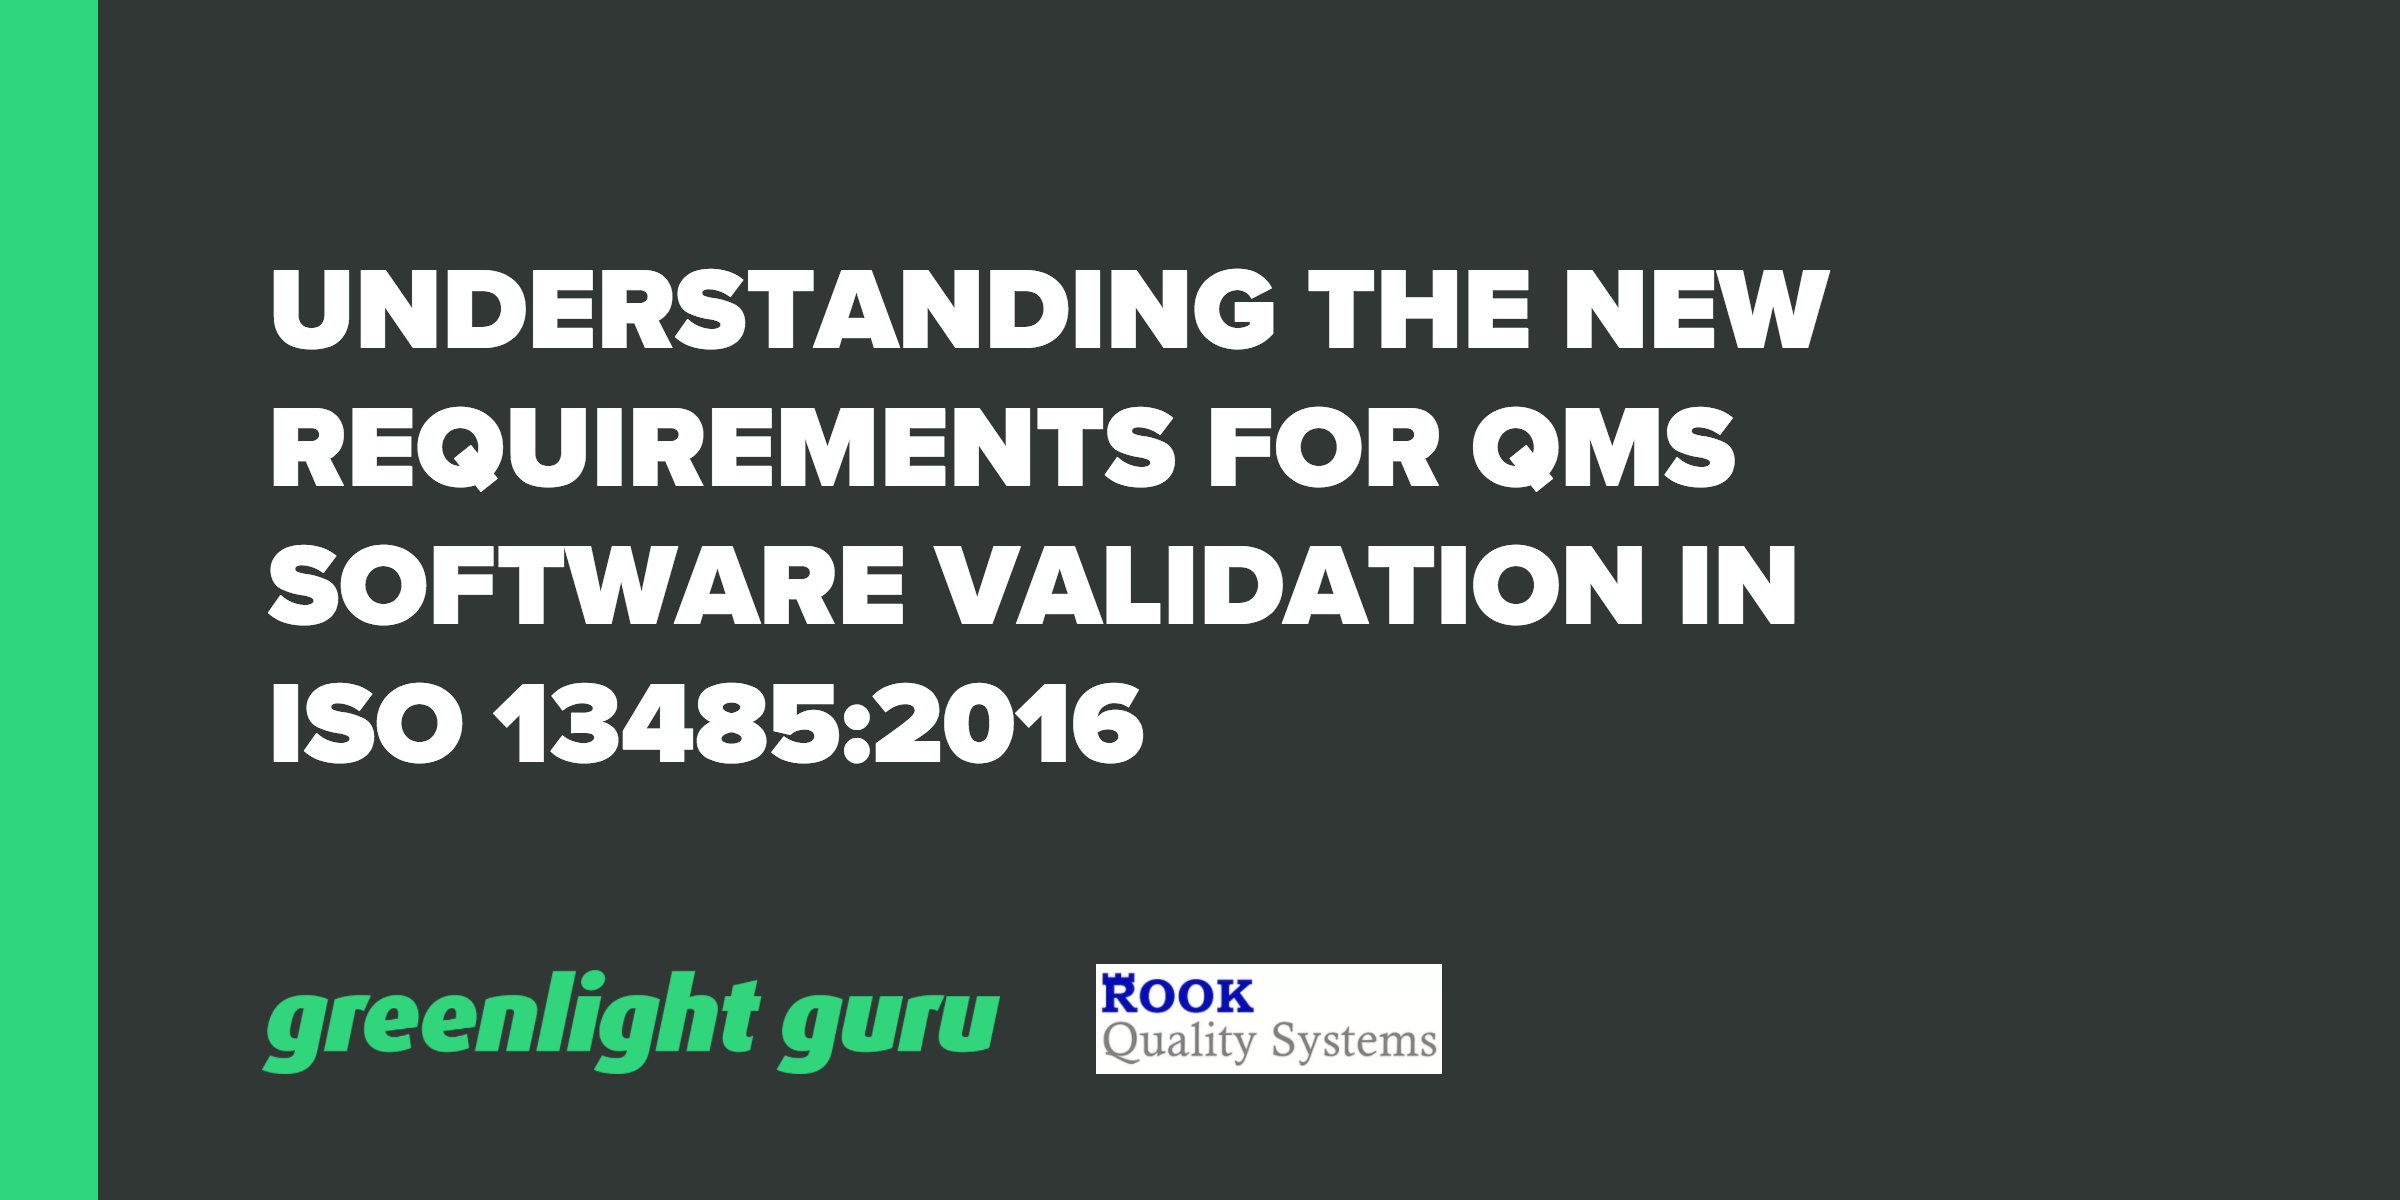 software_validation_requirements_iso_13485_2016